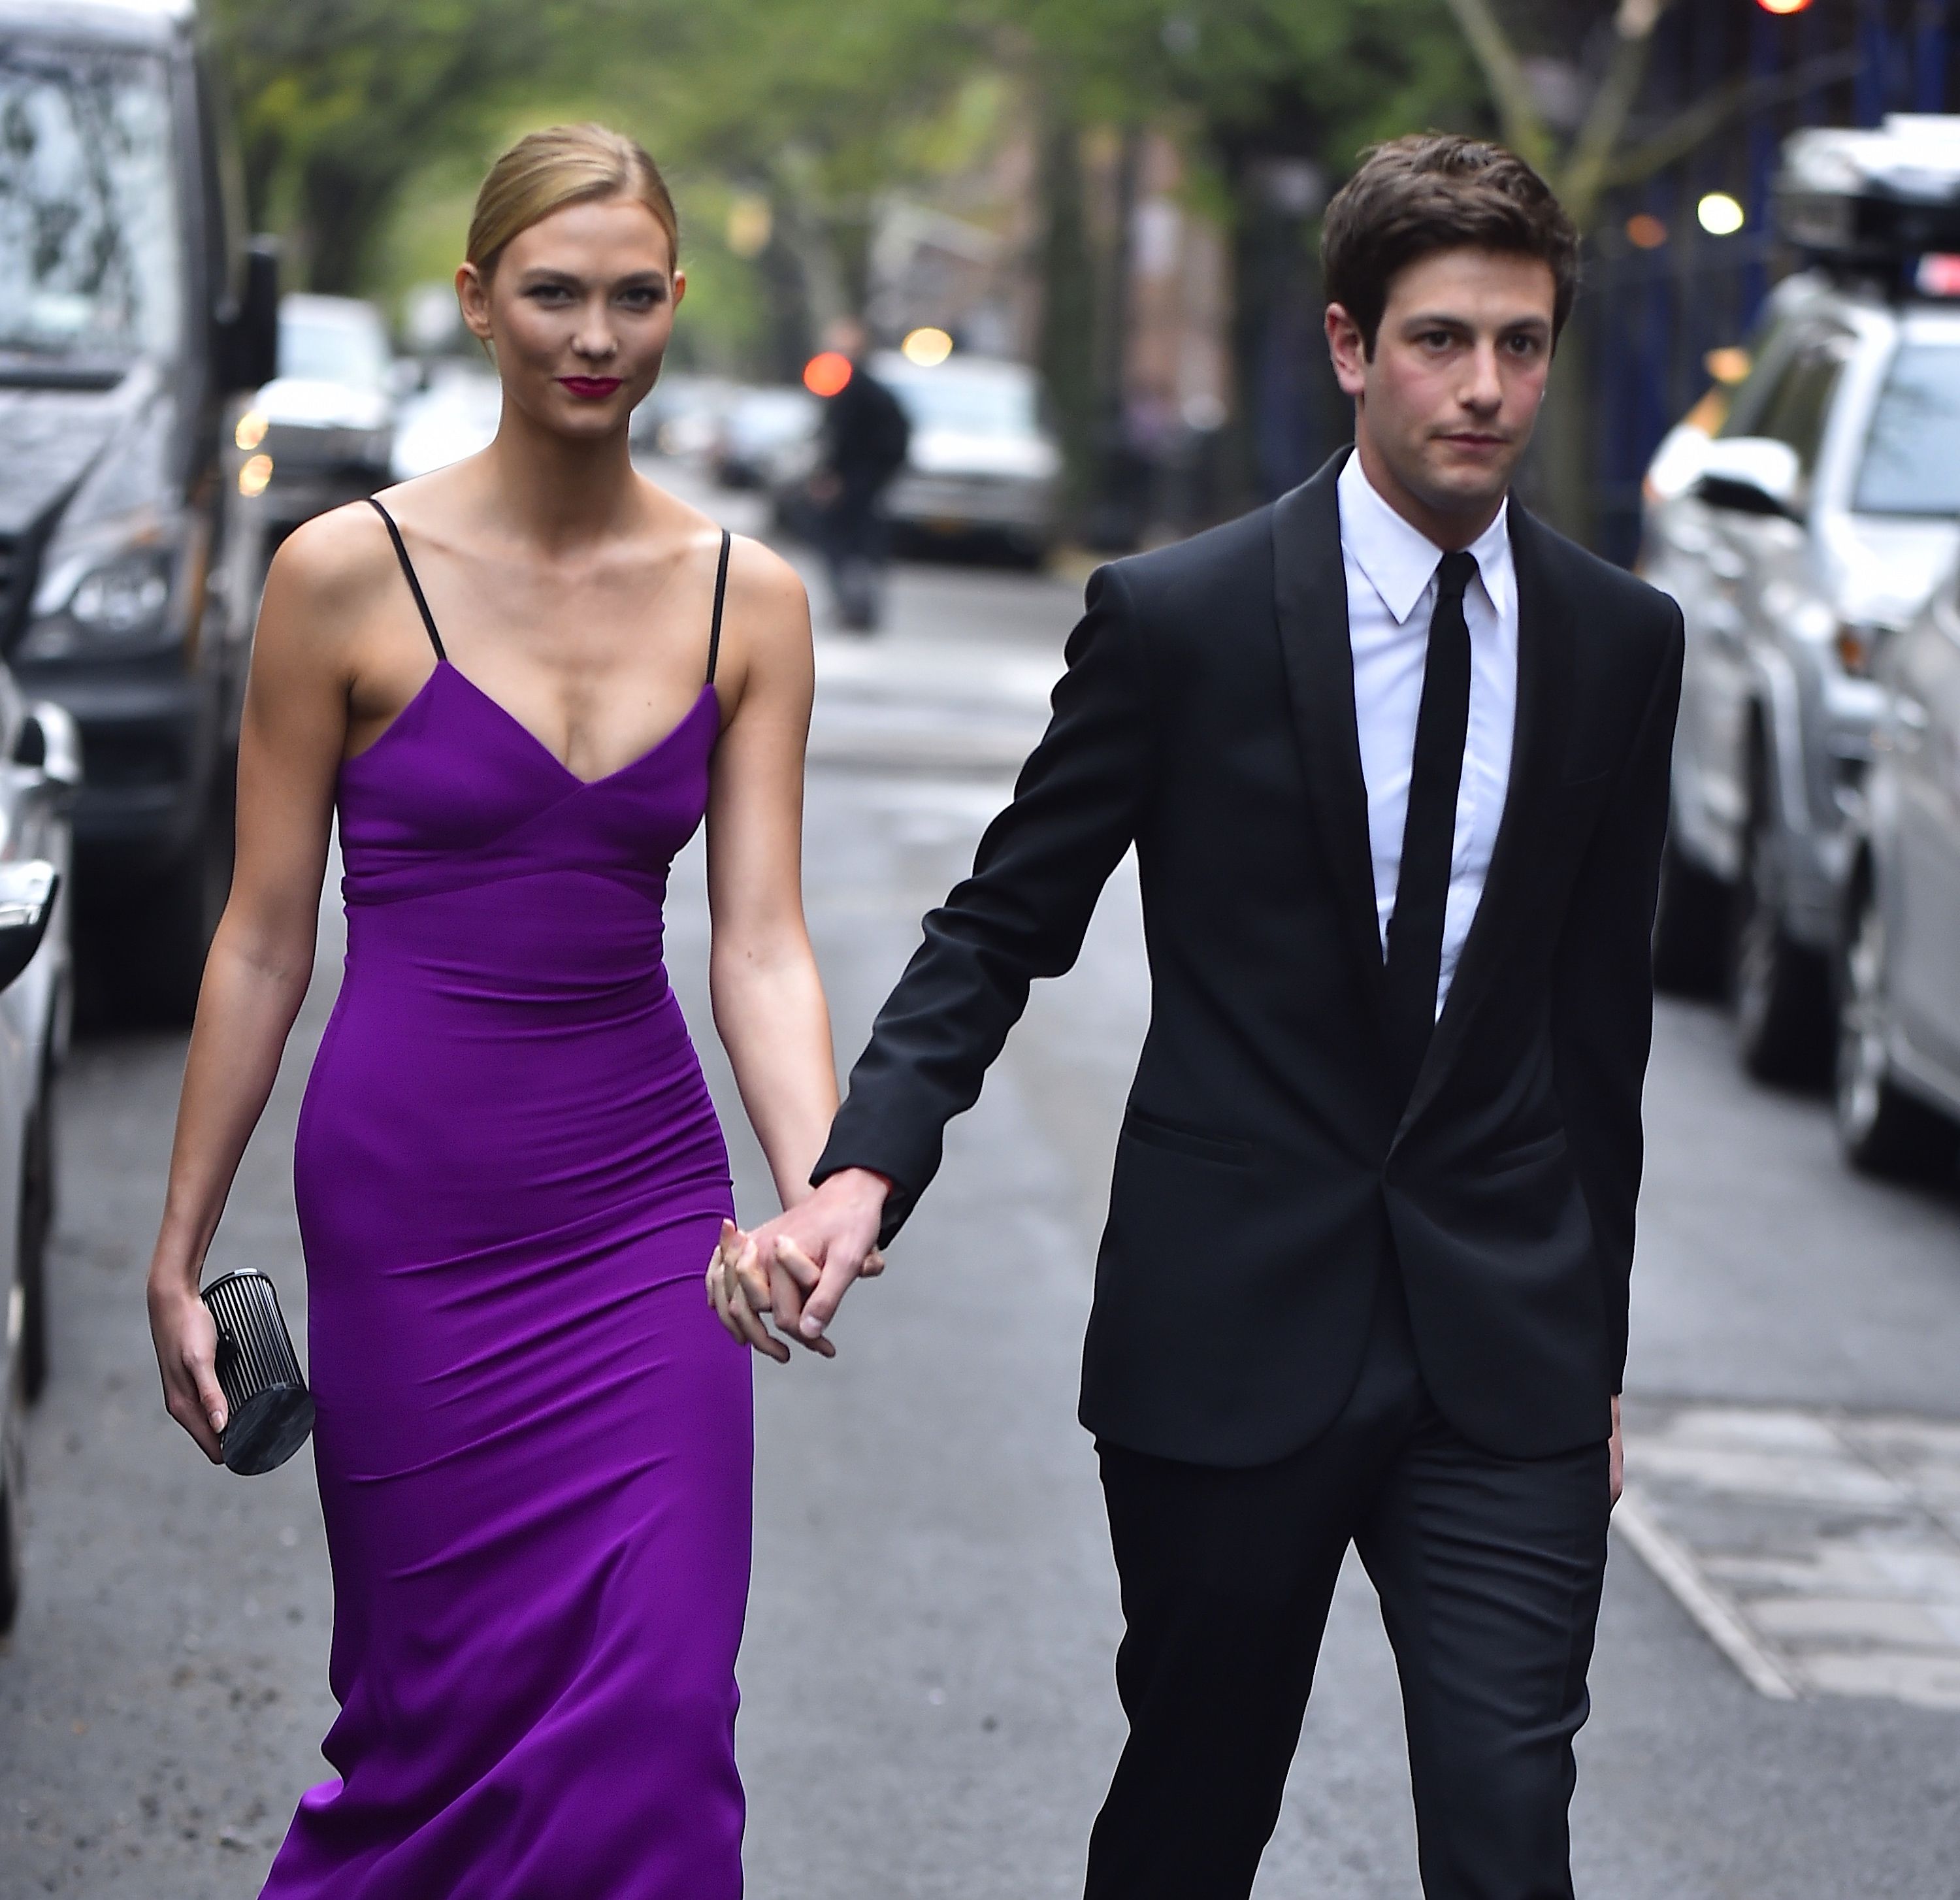 Karlie Kloss And Joshua Kushner Wedding Party Pictures